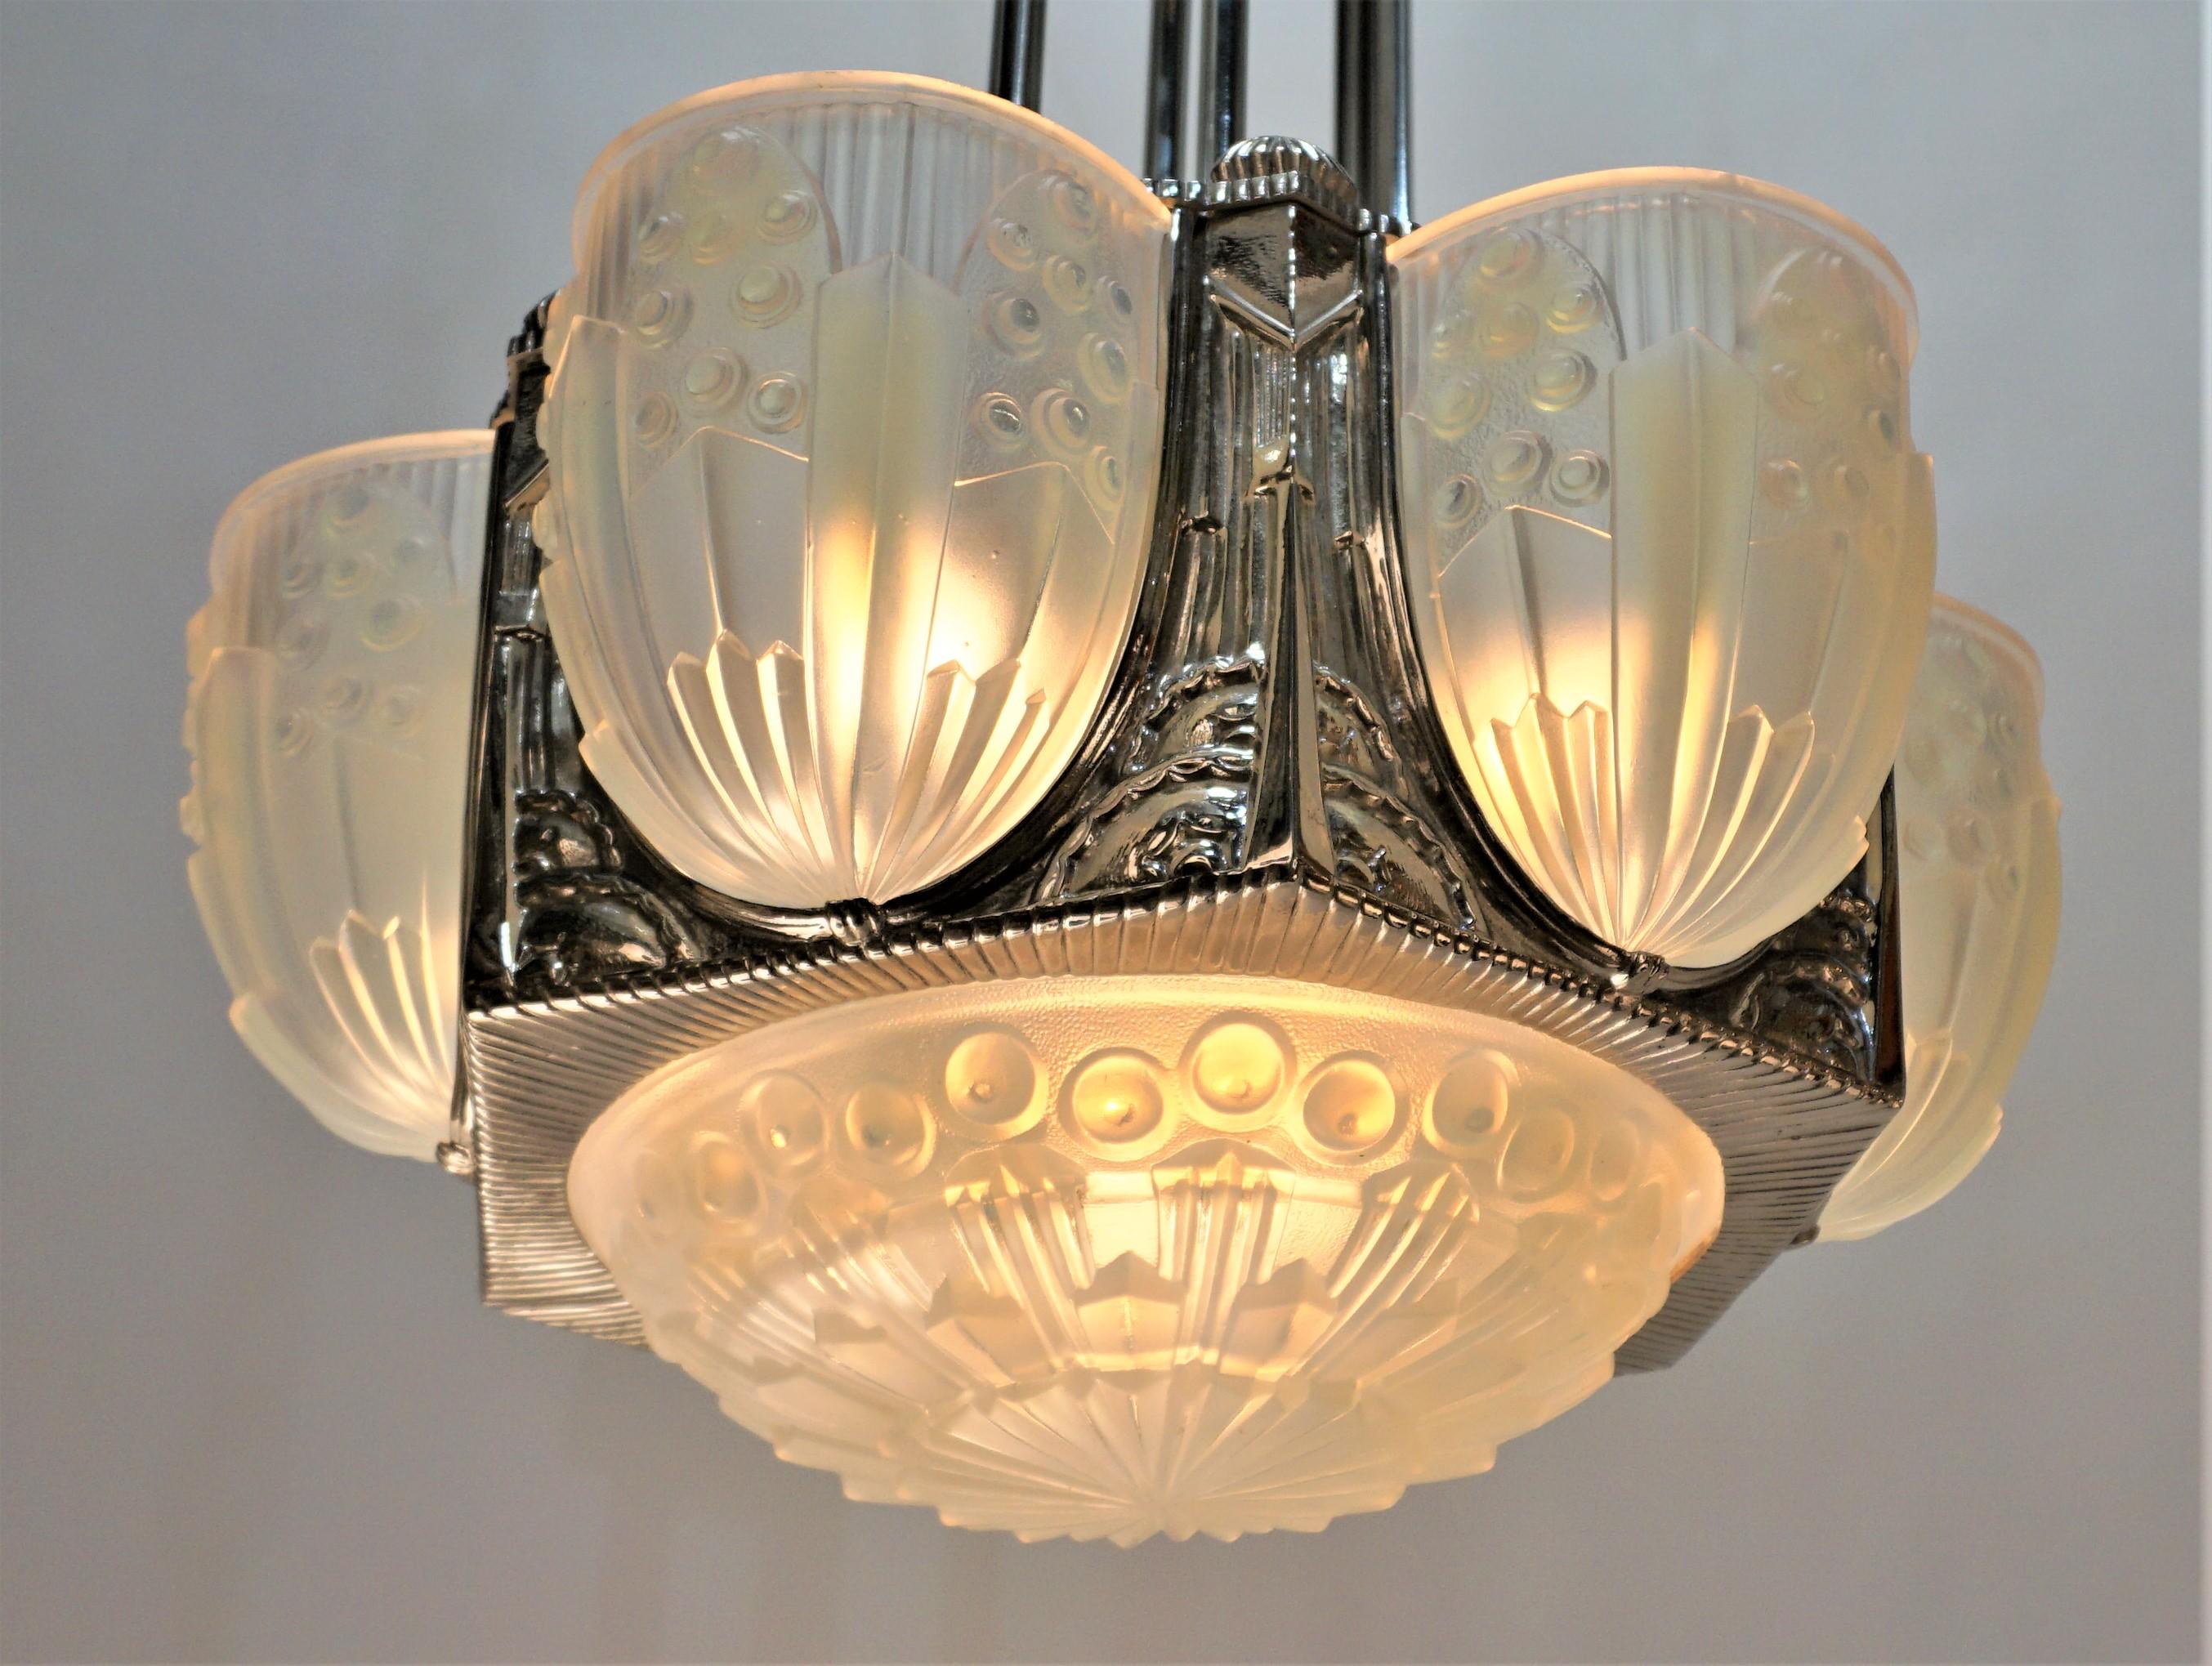 This elegant and rare French art deco chandelier was designed in 1920's by the master craftsman and designer 